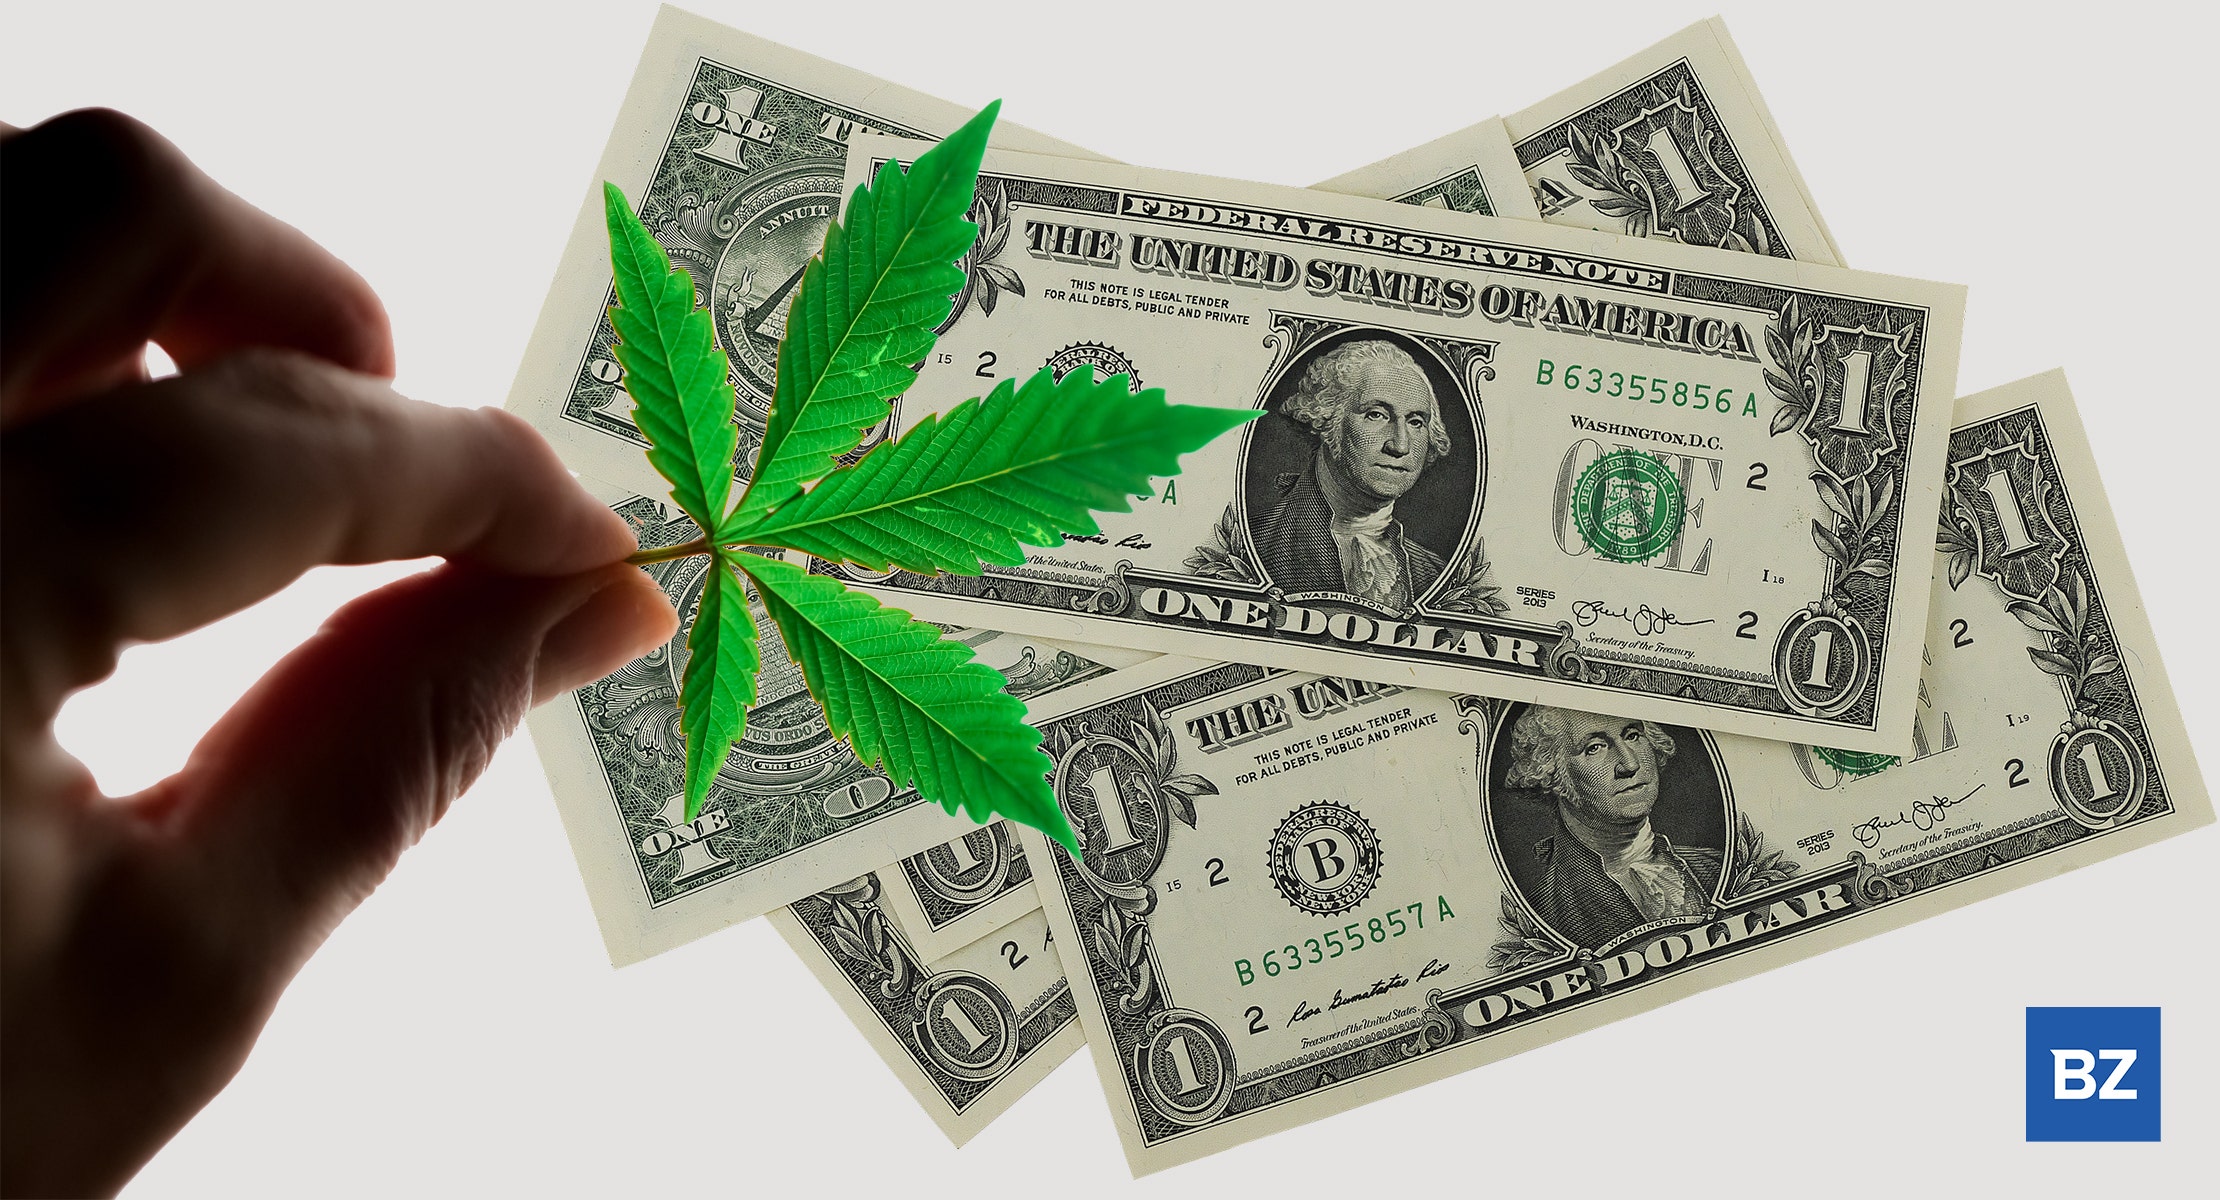 IM Cannabis To Raise Up To $5M Via Private Placement Led By Management